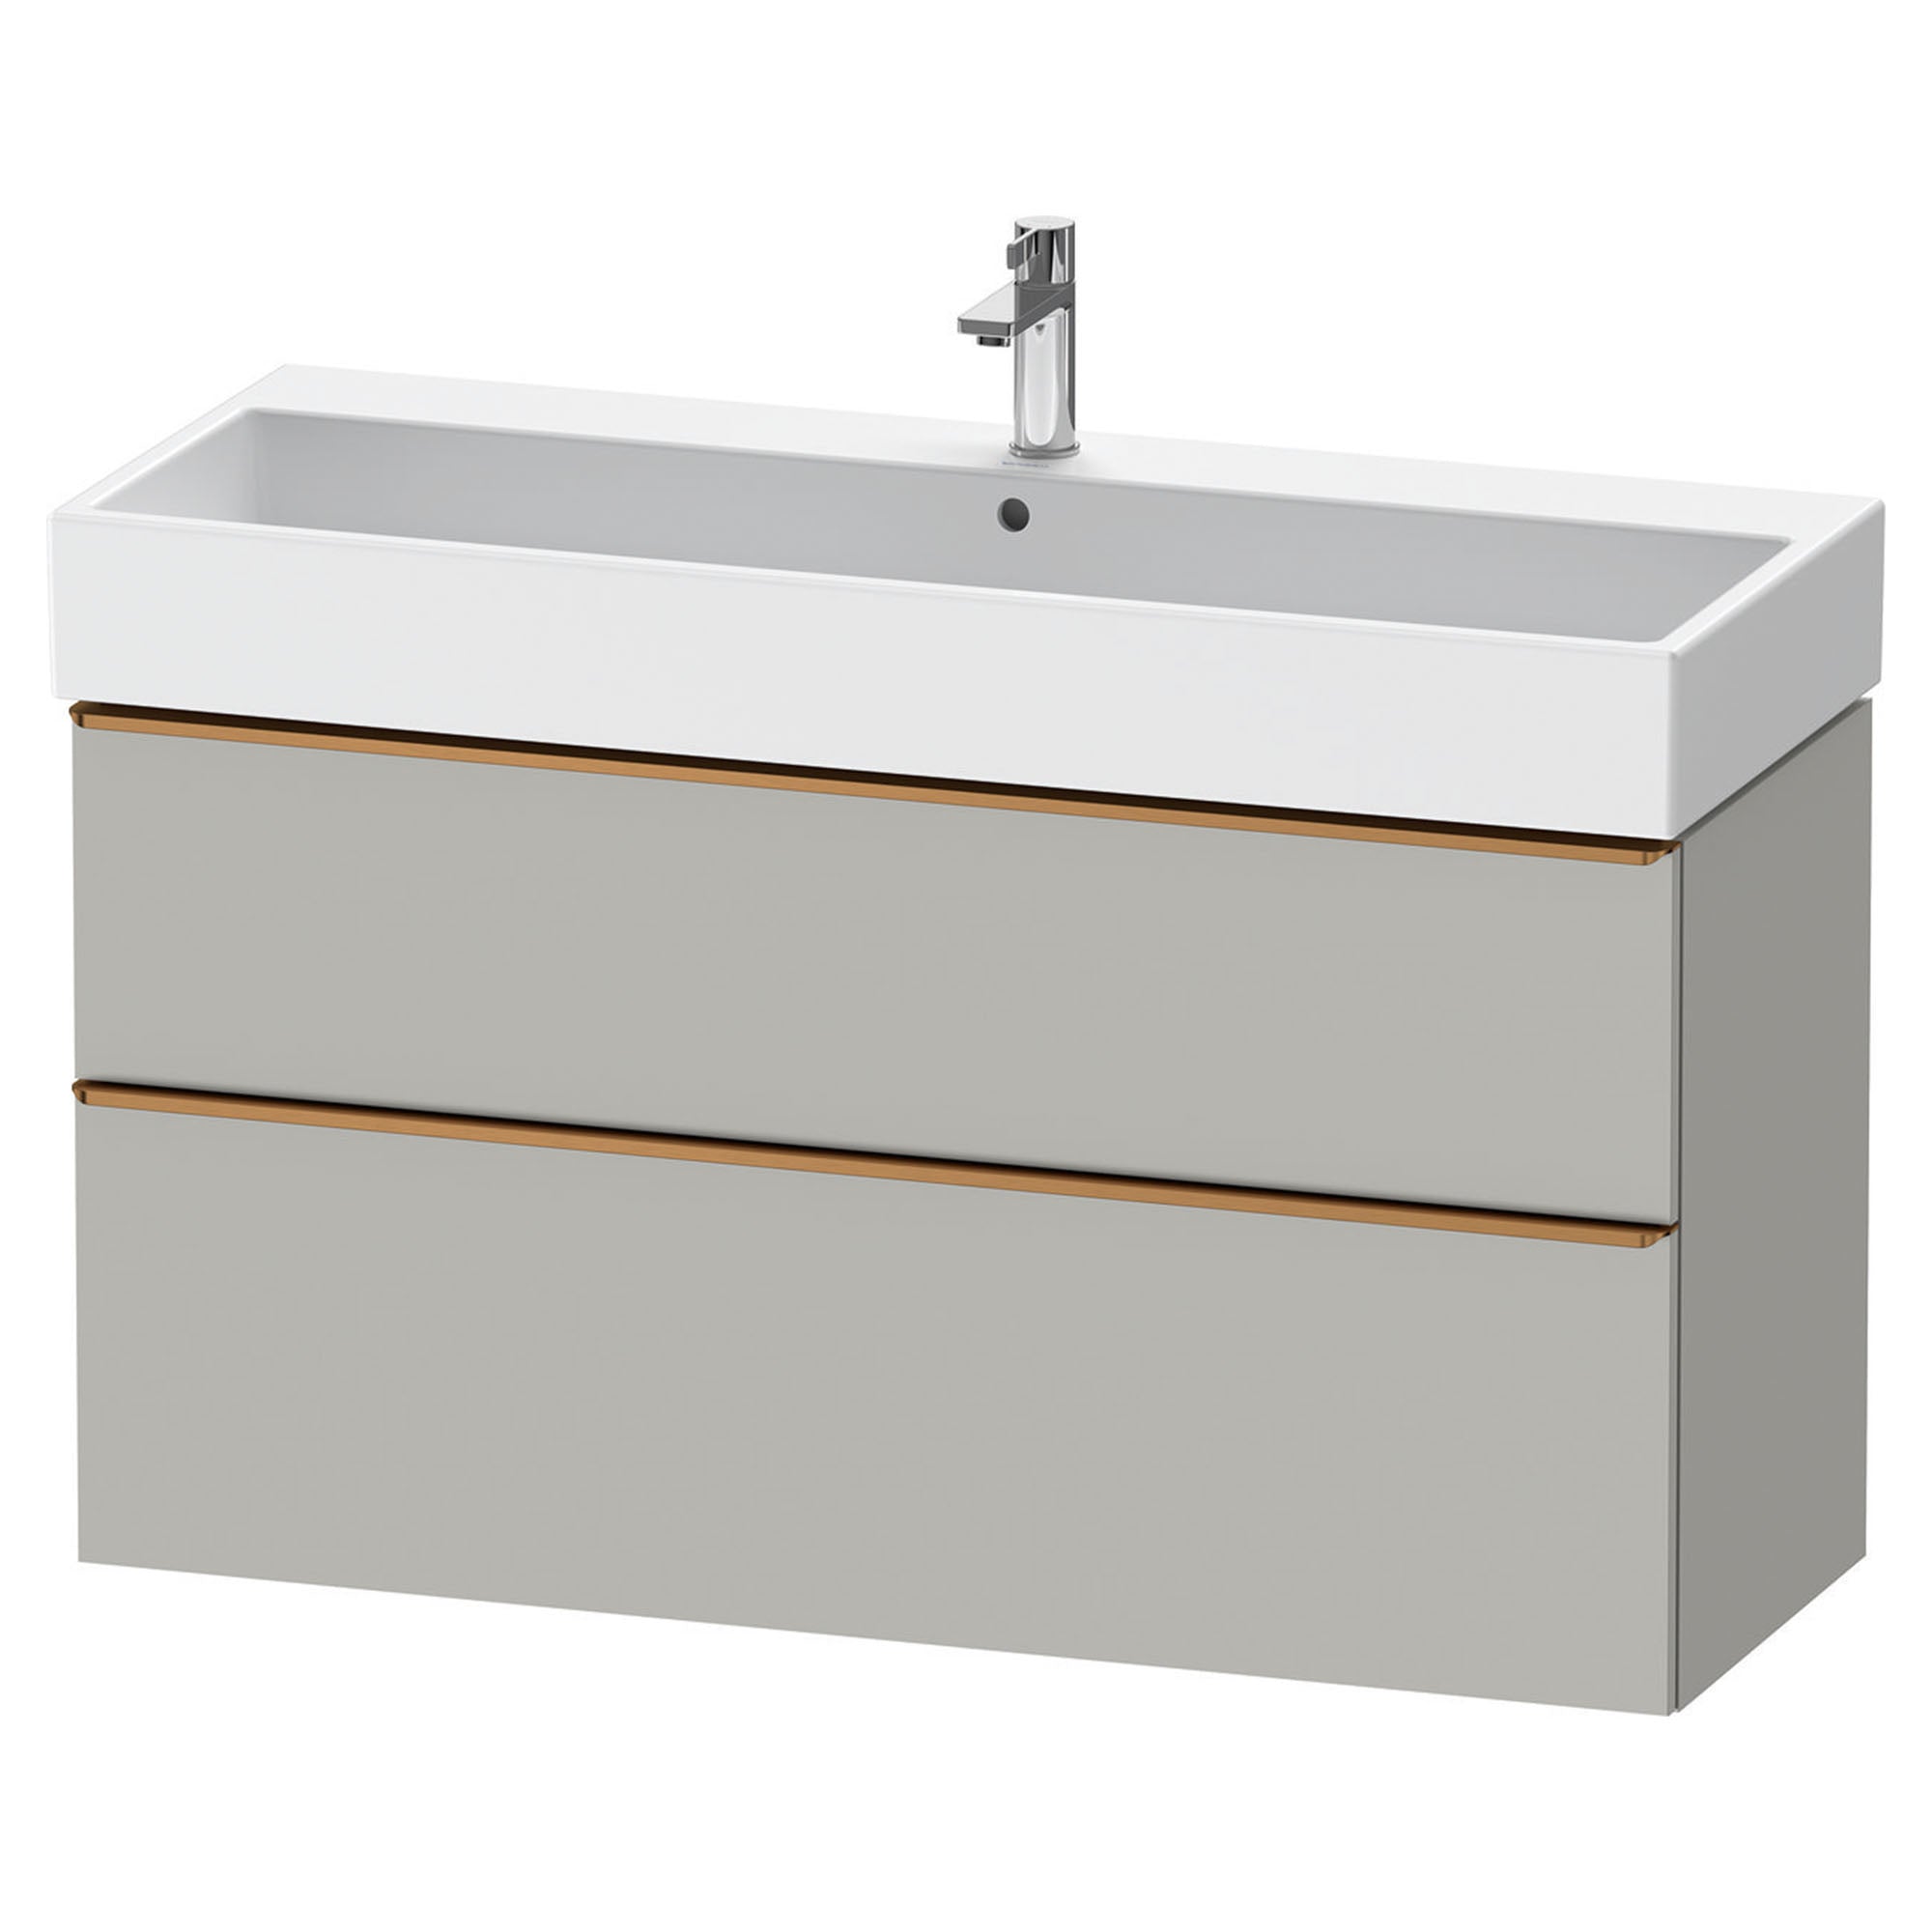 duravit d-neo 1200 wall mounted vanity unit with vero basin concrete grey brushed bronze handles